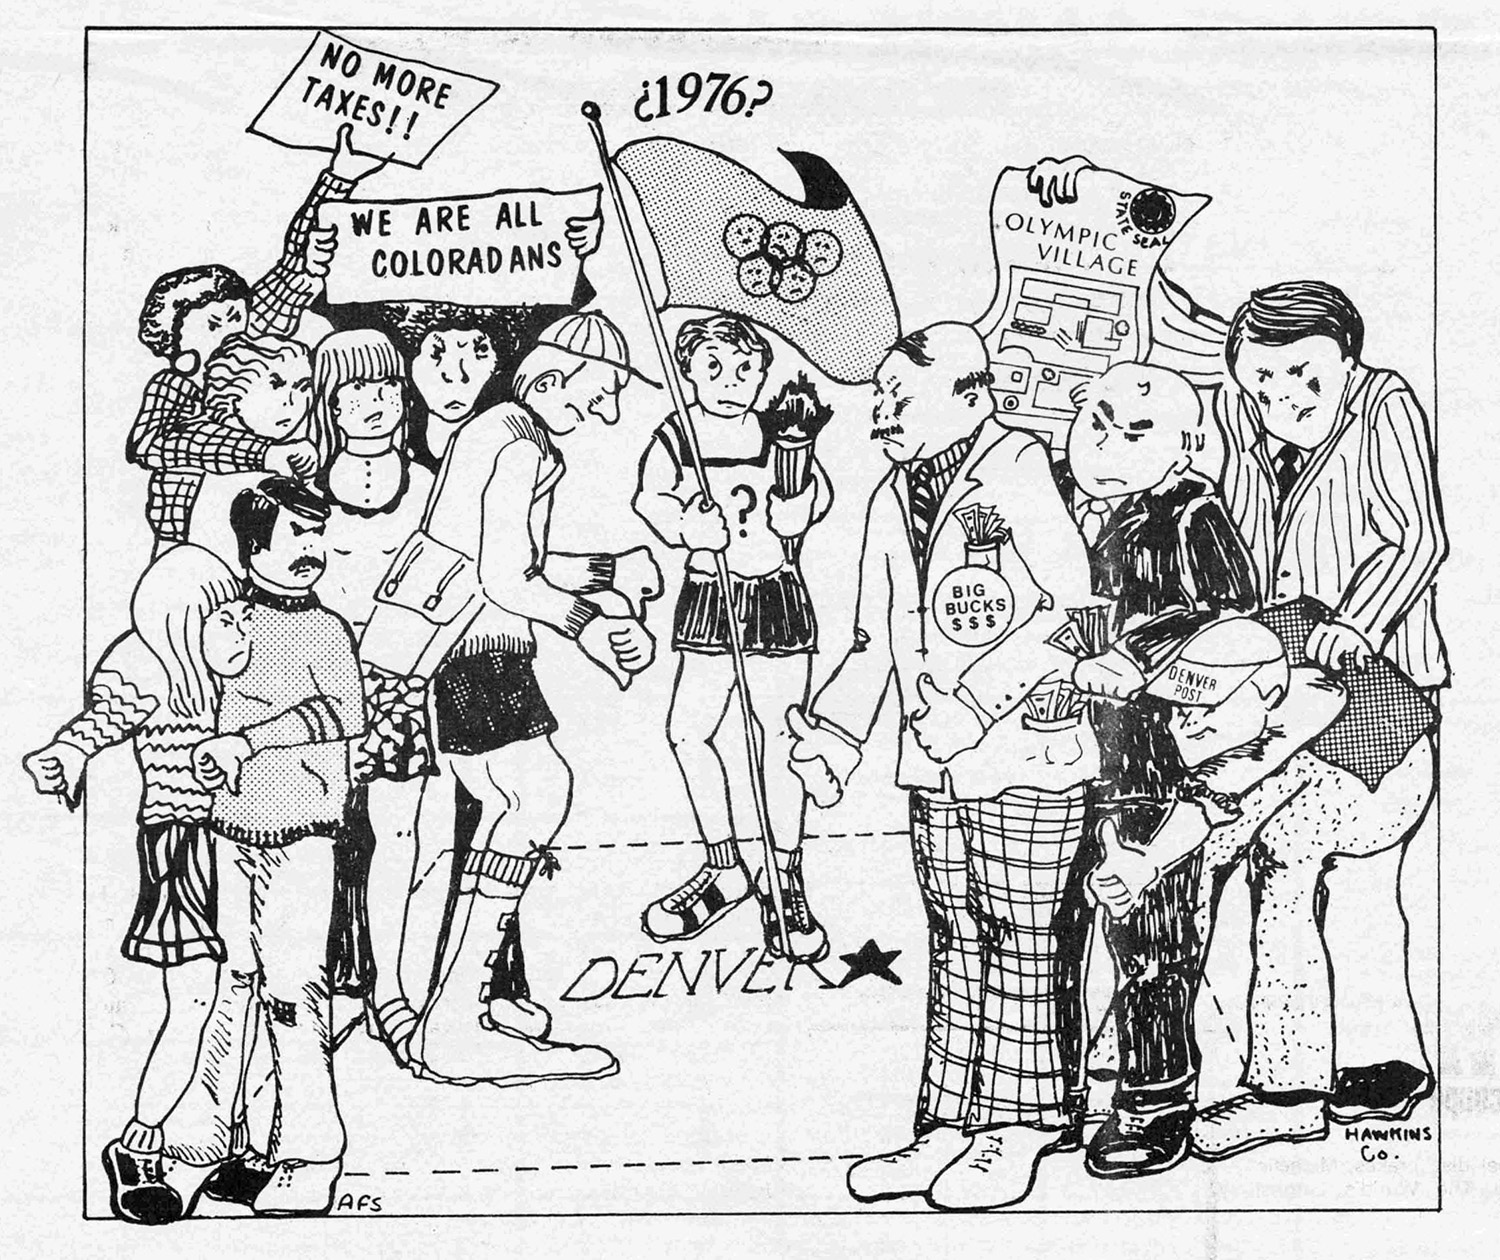 Editorial cartoon showing the heated political battle over the Olympics